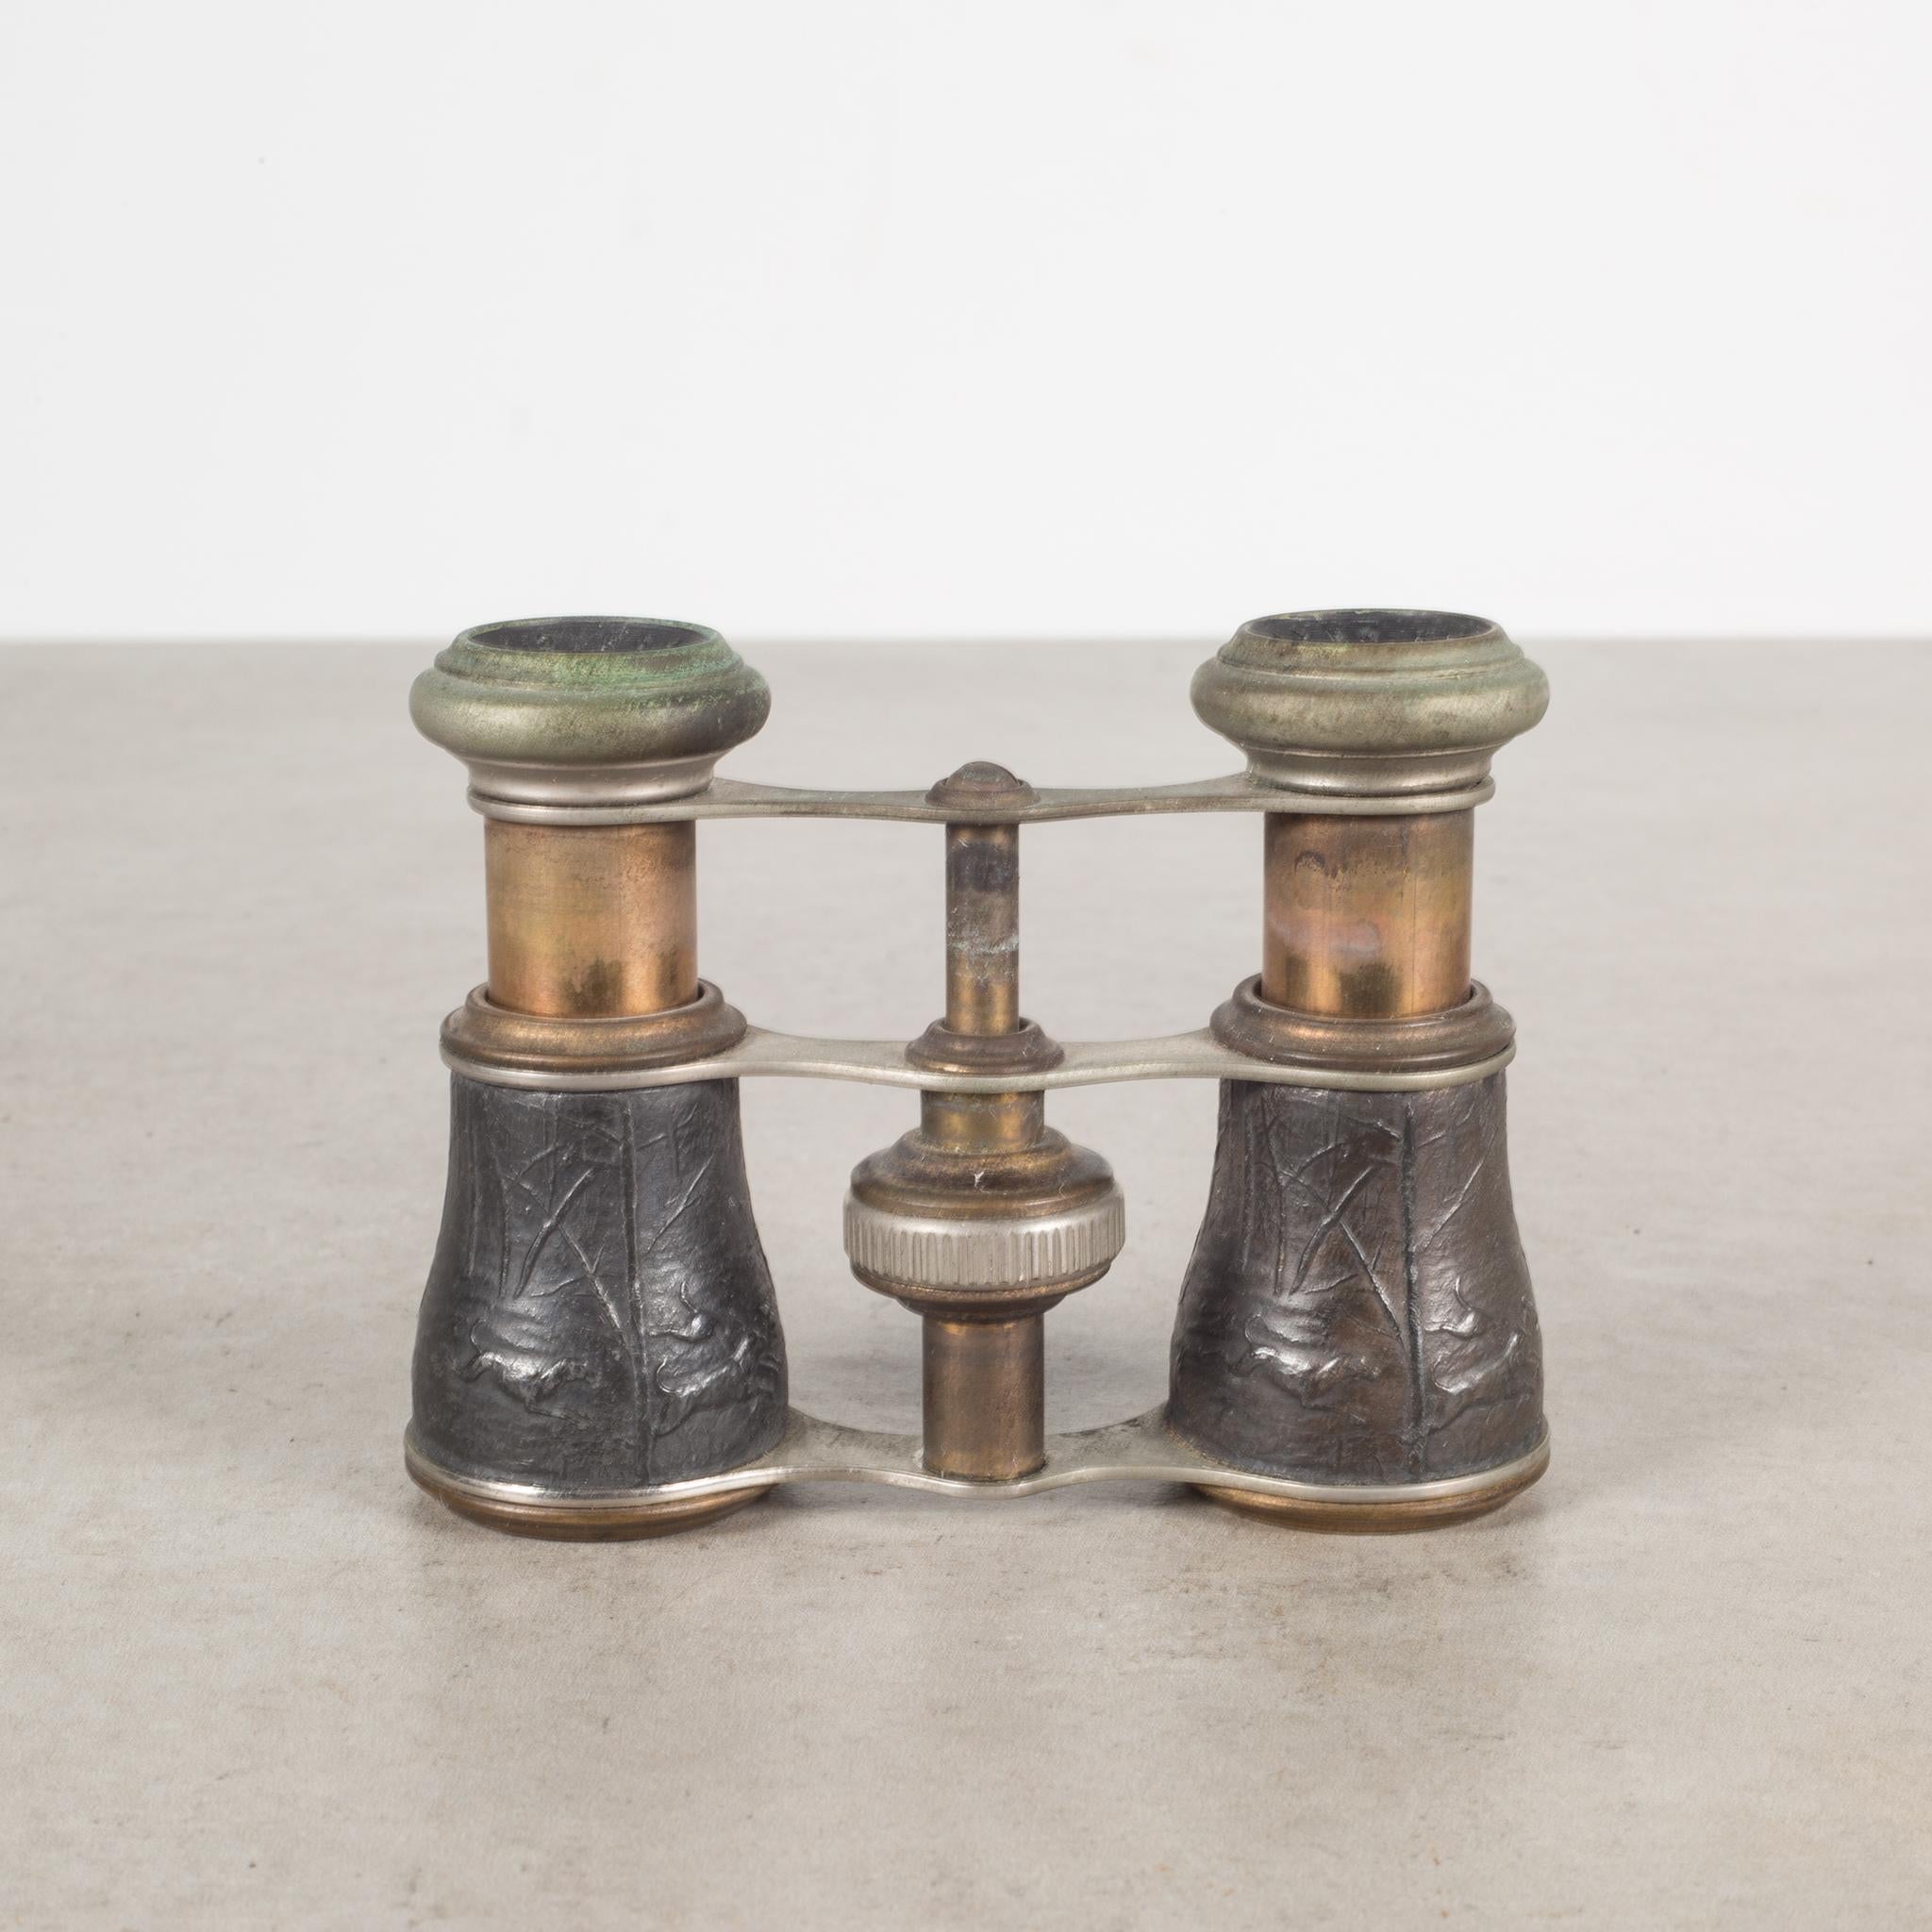 About

This is an original pair of brass and embossed binoculars by Sportier Paris. Good working order with clear binocular viewing. This piece has retained its original finish.

 Creator: Sportier Paris, France.
 Date of manufacture: c.1880s
